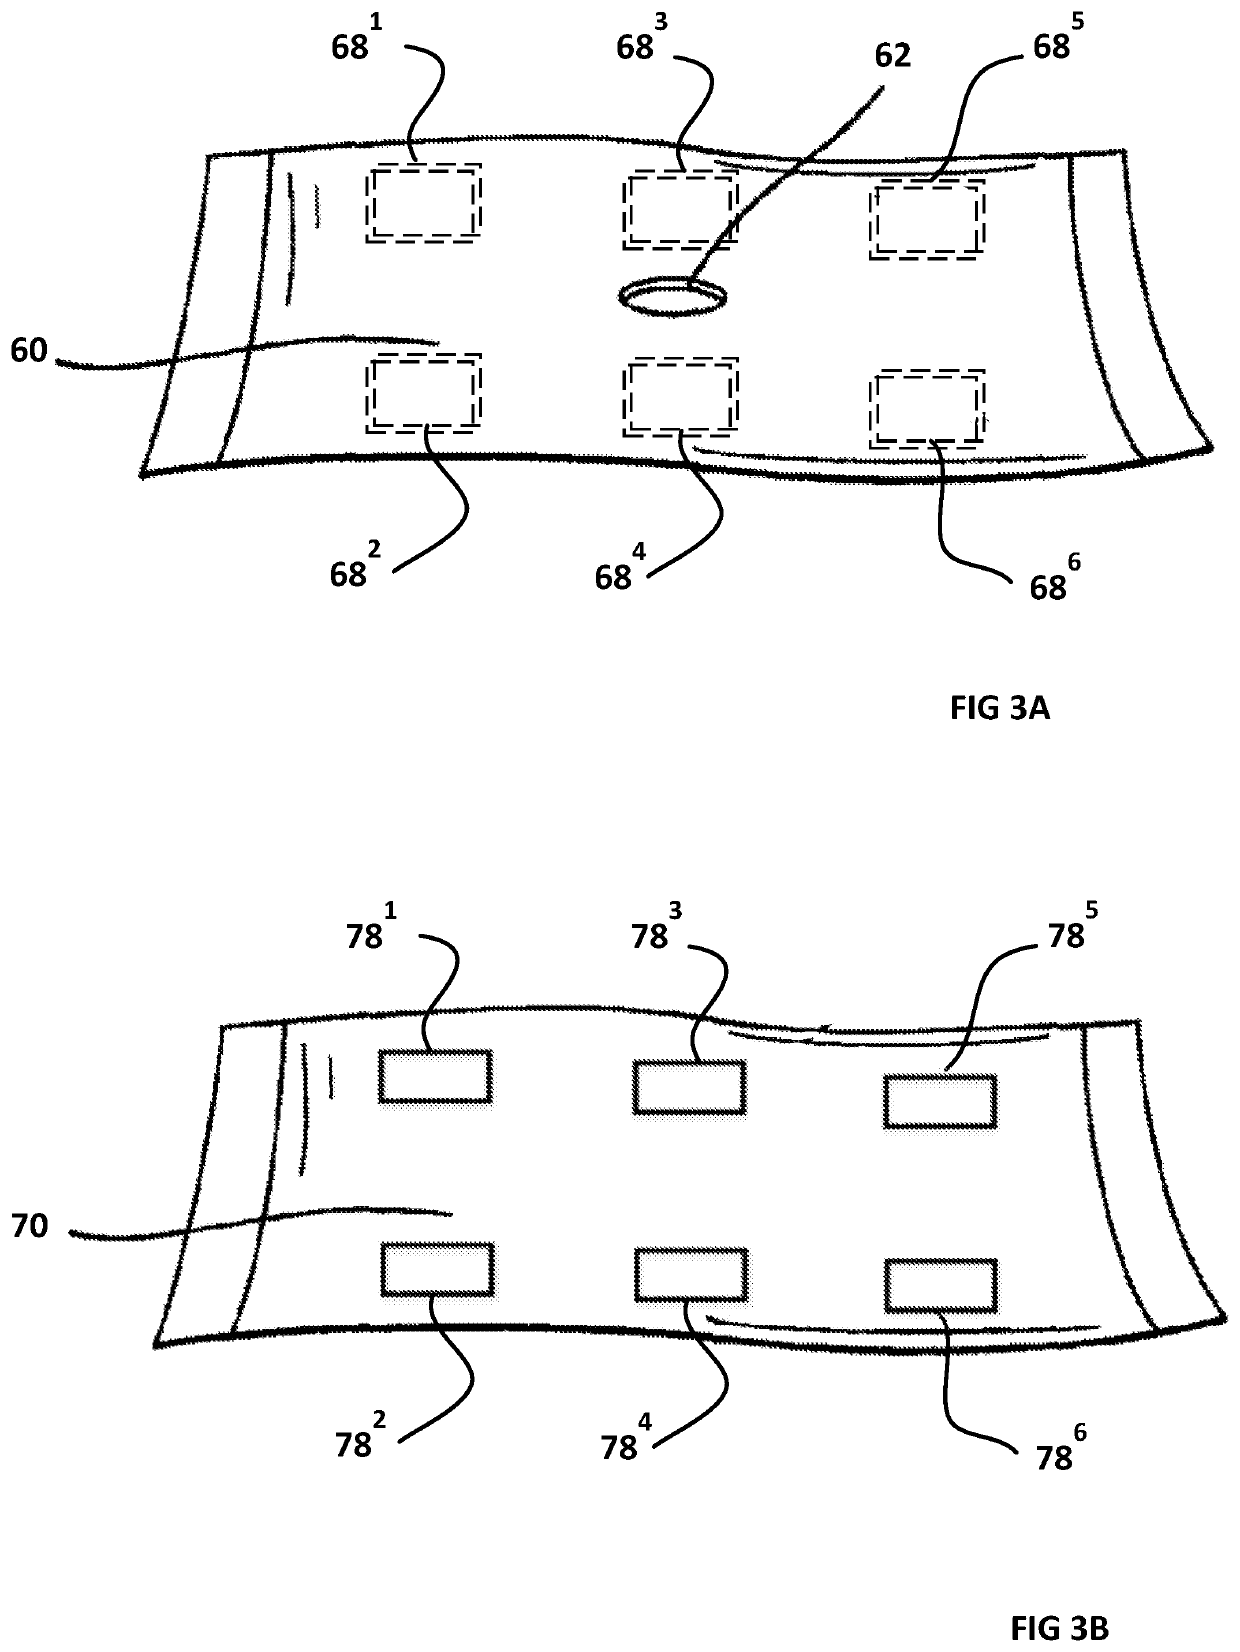 Medical wound covering employing electrical stimulation to control blood flow